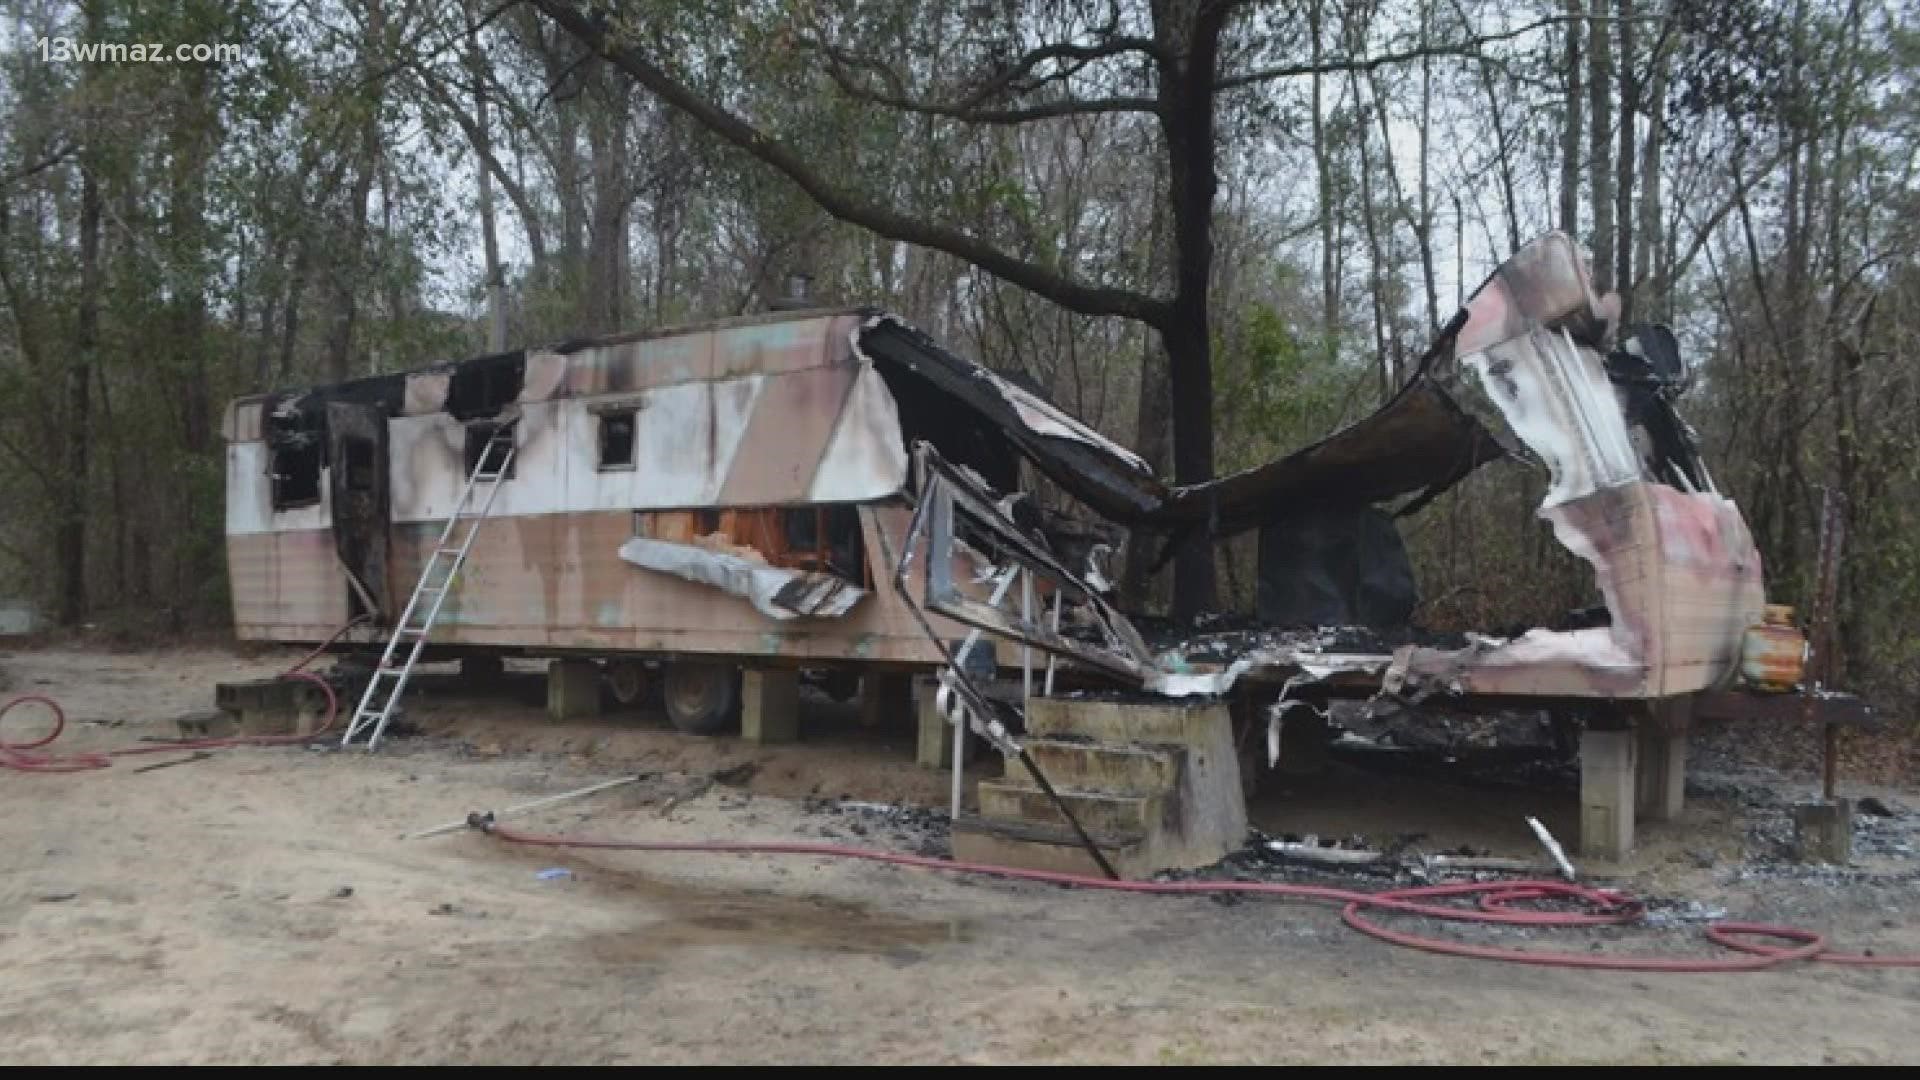 The fire left the 62-year-old homeowner dead